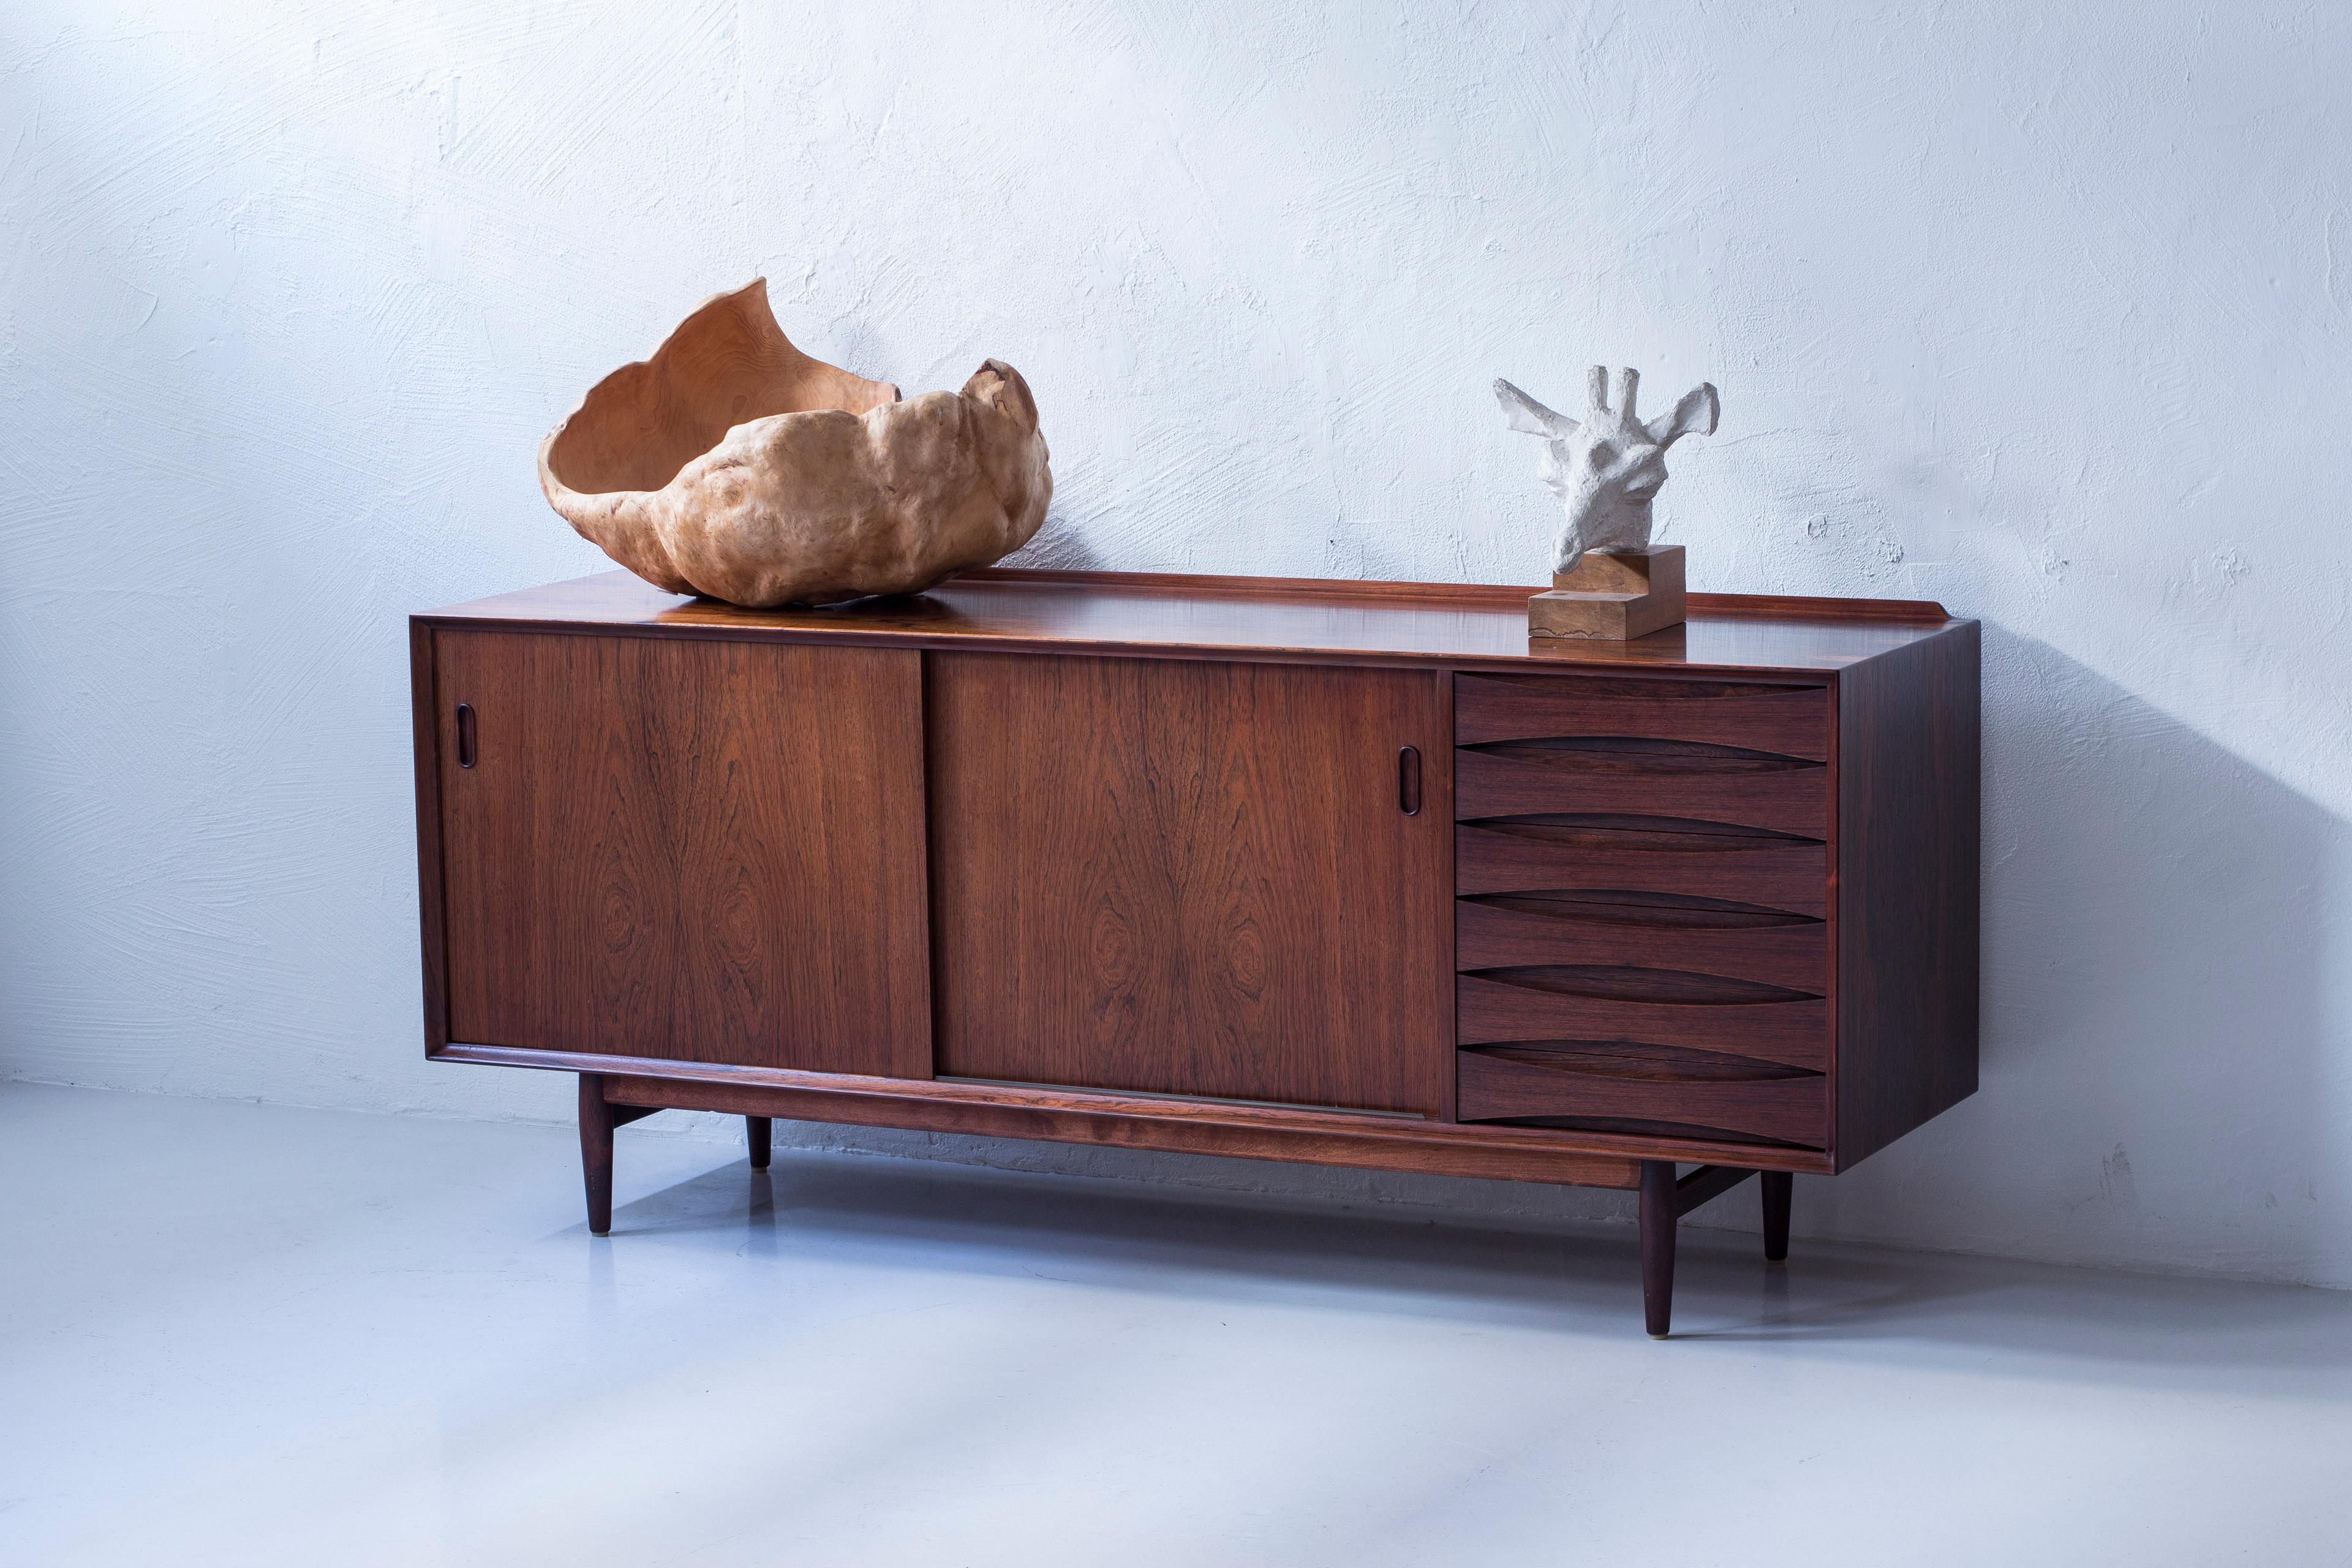 Sideboard model OS29 designed by Arne Vodder. Produced in Denmark by Sibast Furniture. Made from palisander on the outside and mahogany on the inside of the cabinet. Sliding doors and six drawers with the characteristic 